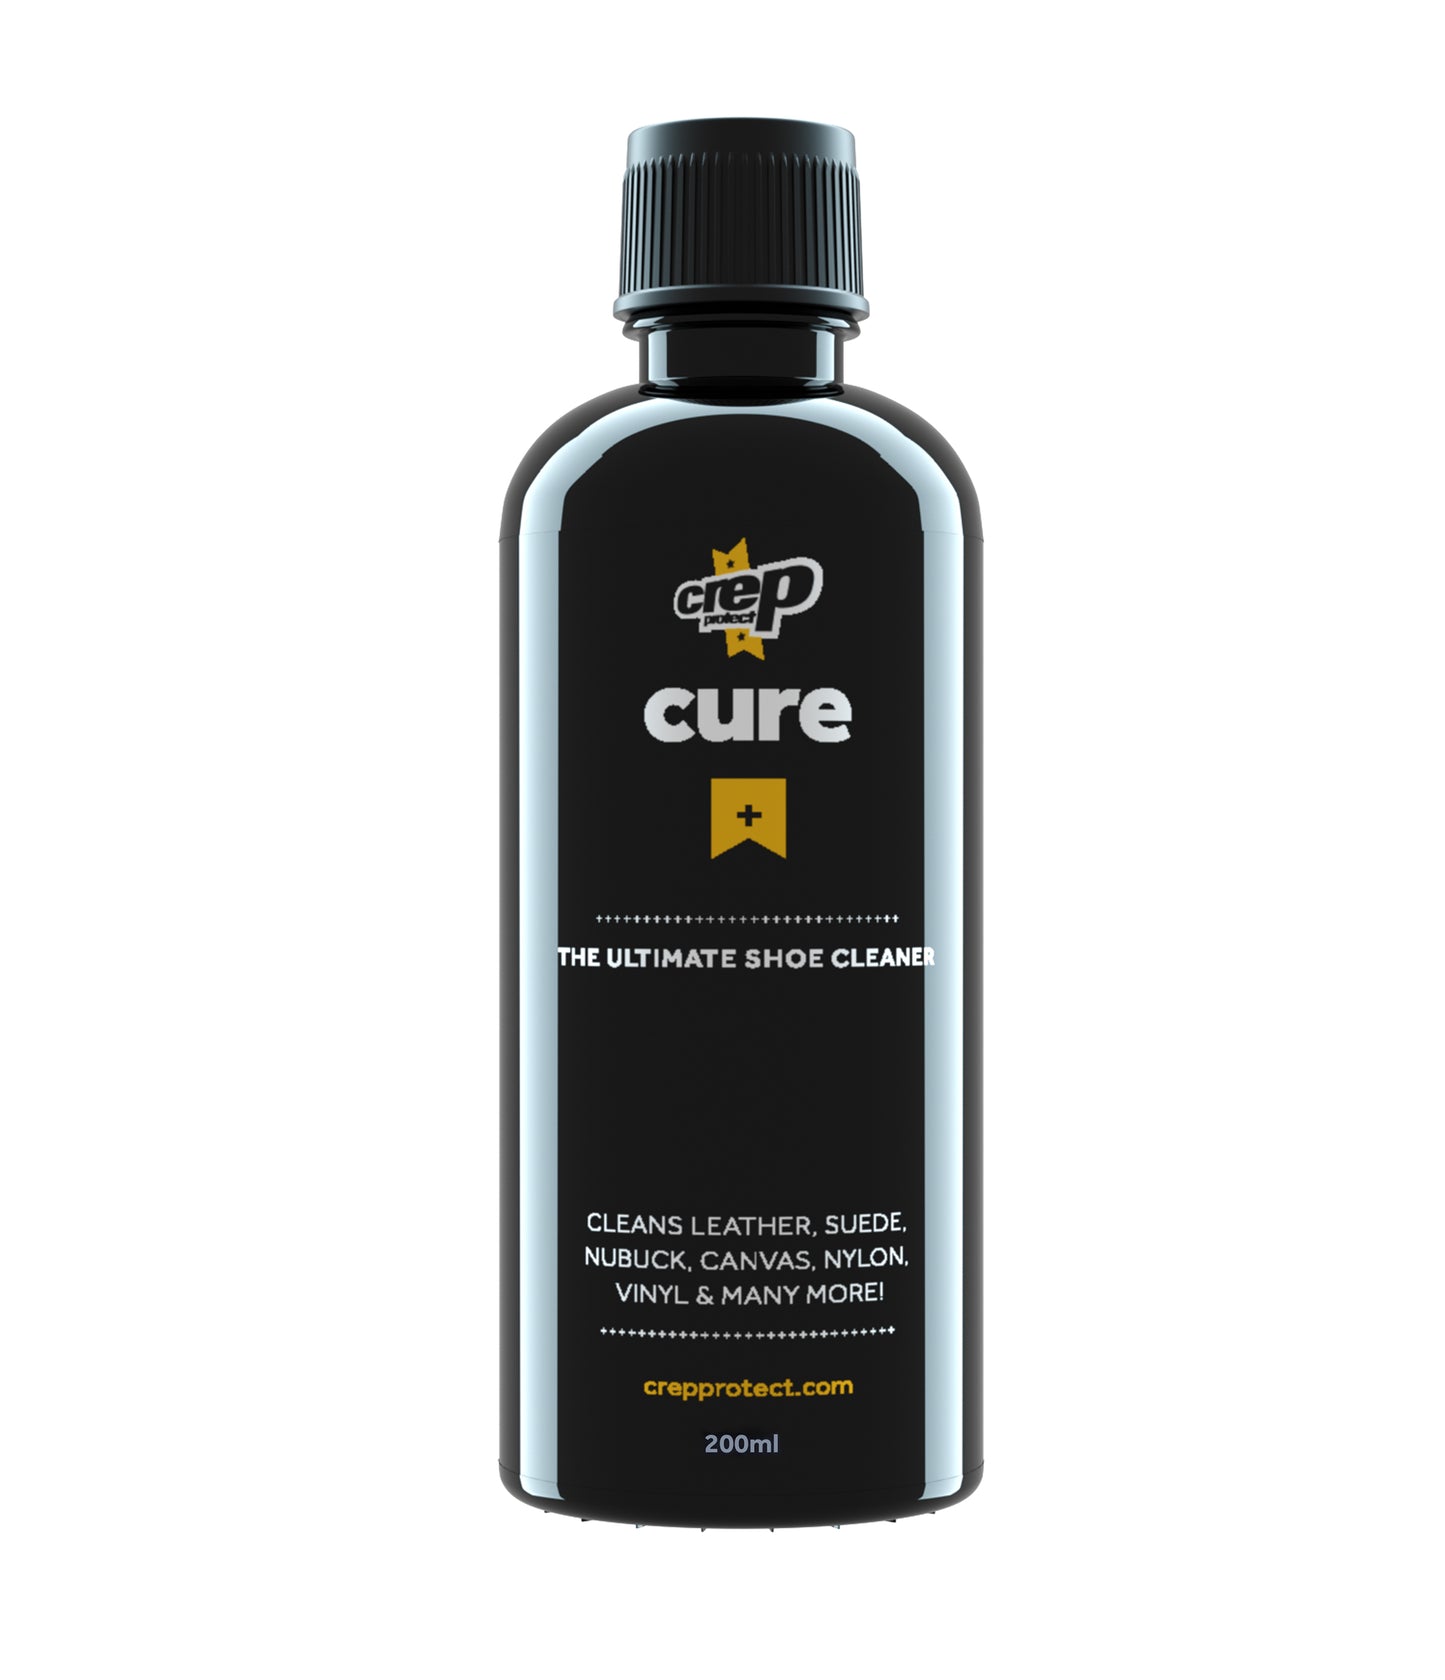 Crep Protect - Cure Refill 200ml